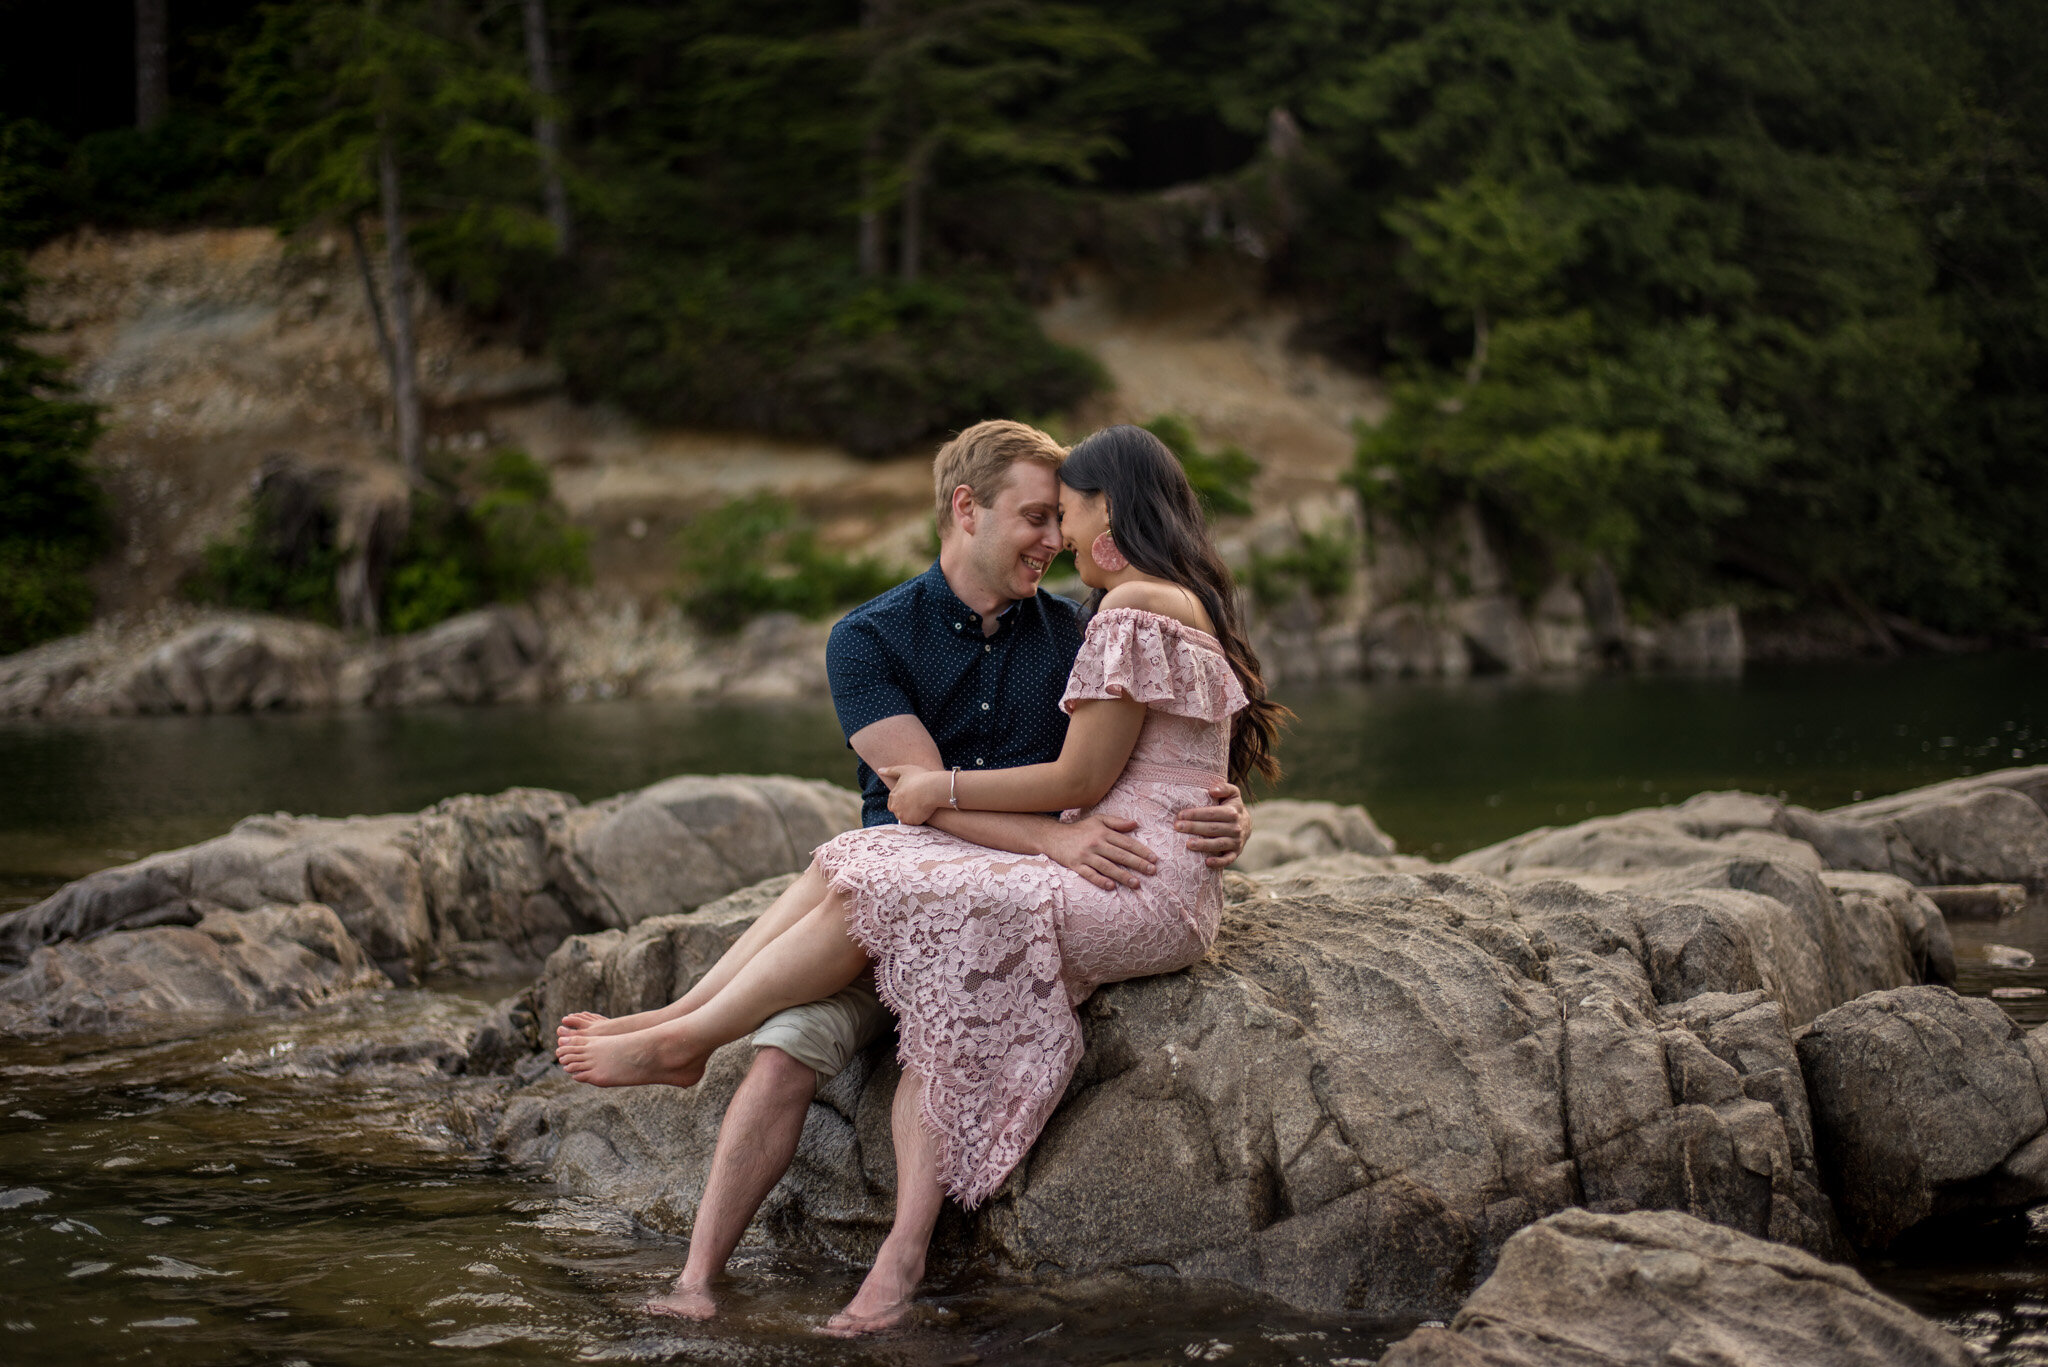 An engagement session taken at Golden Ears Provincial Park in Maple Ridge, B.C.